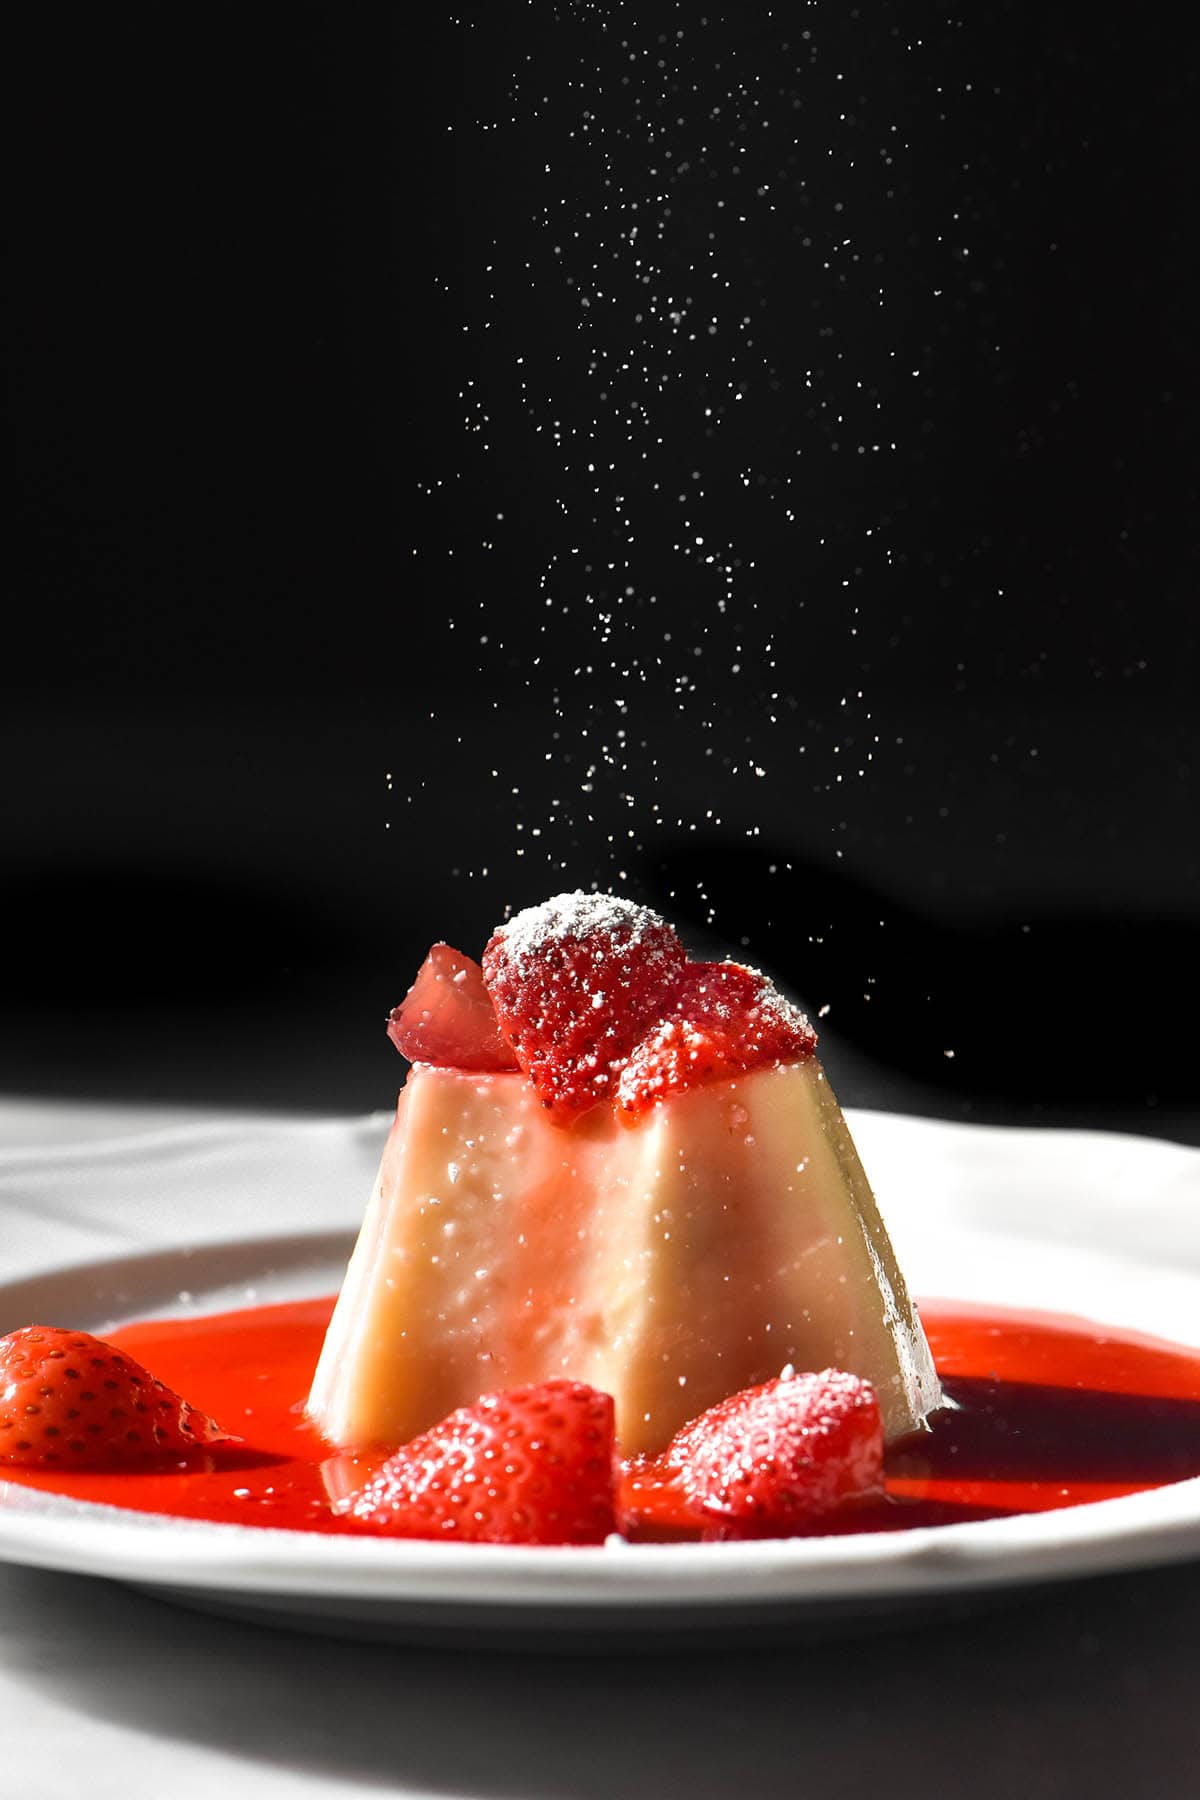 A side on image of a white chocolate panna cotta on a white plate in contrasting sunlight. The panna cotta is topped with a strawberry coulis and icing sugar that is being sprinkled from the top of the image